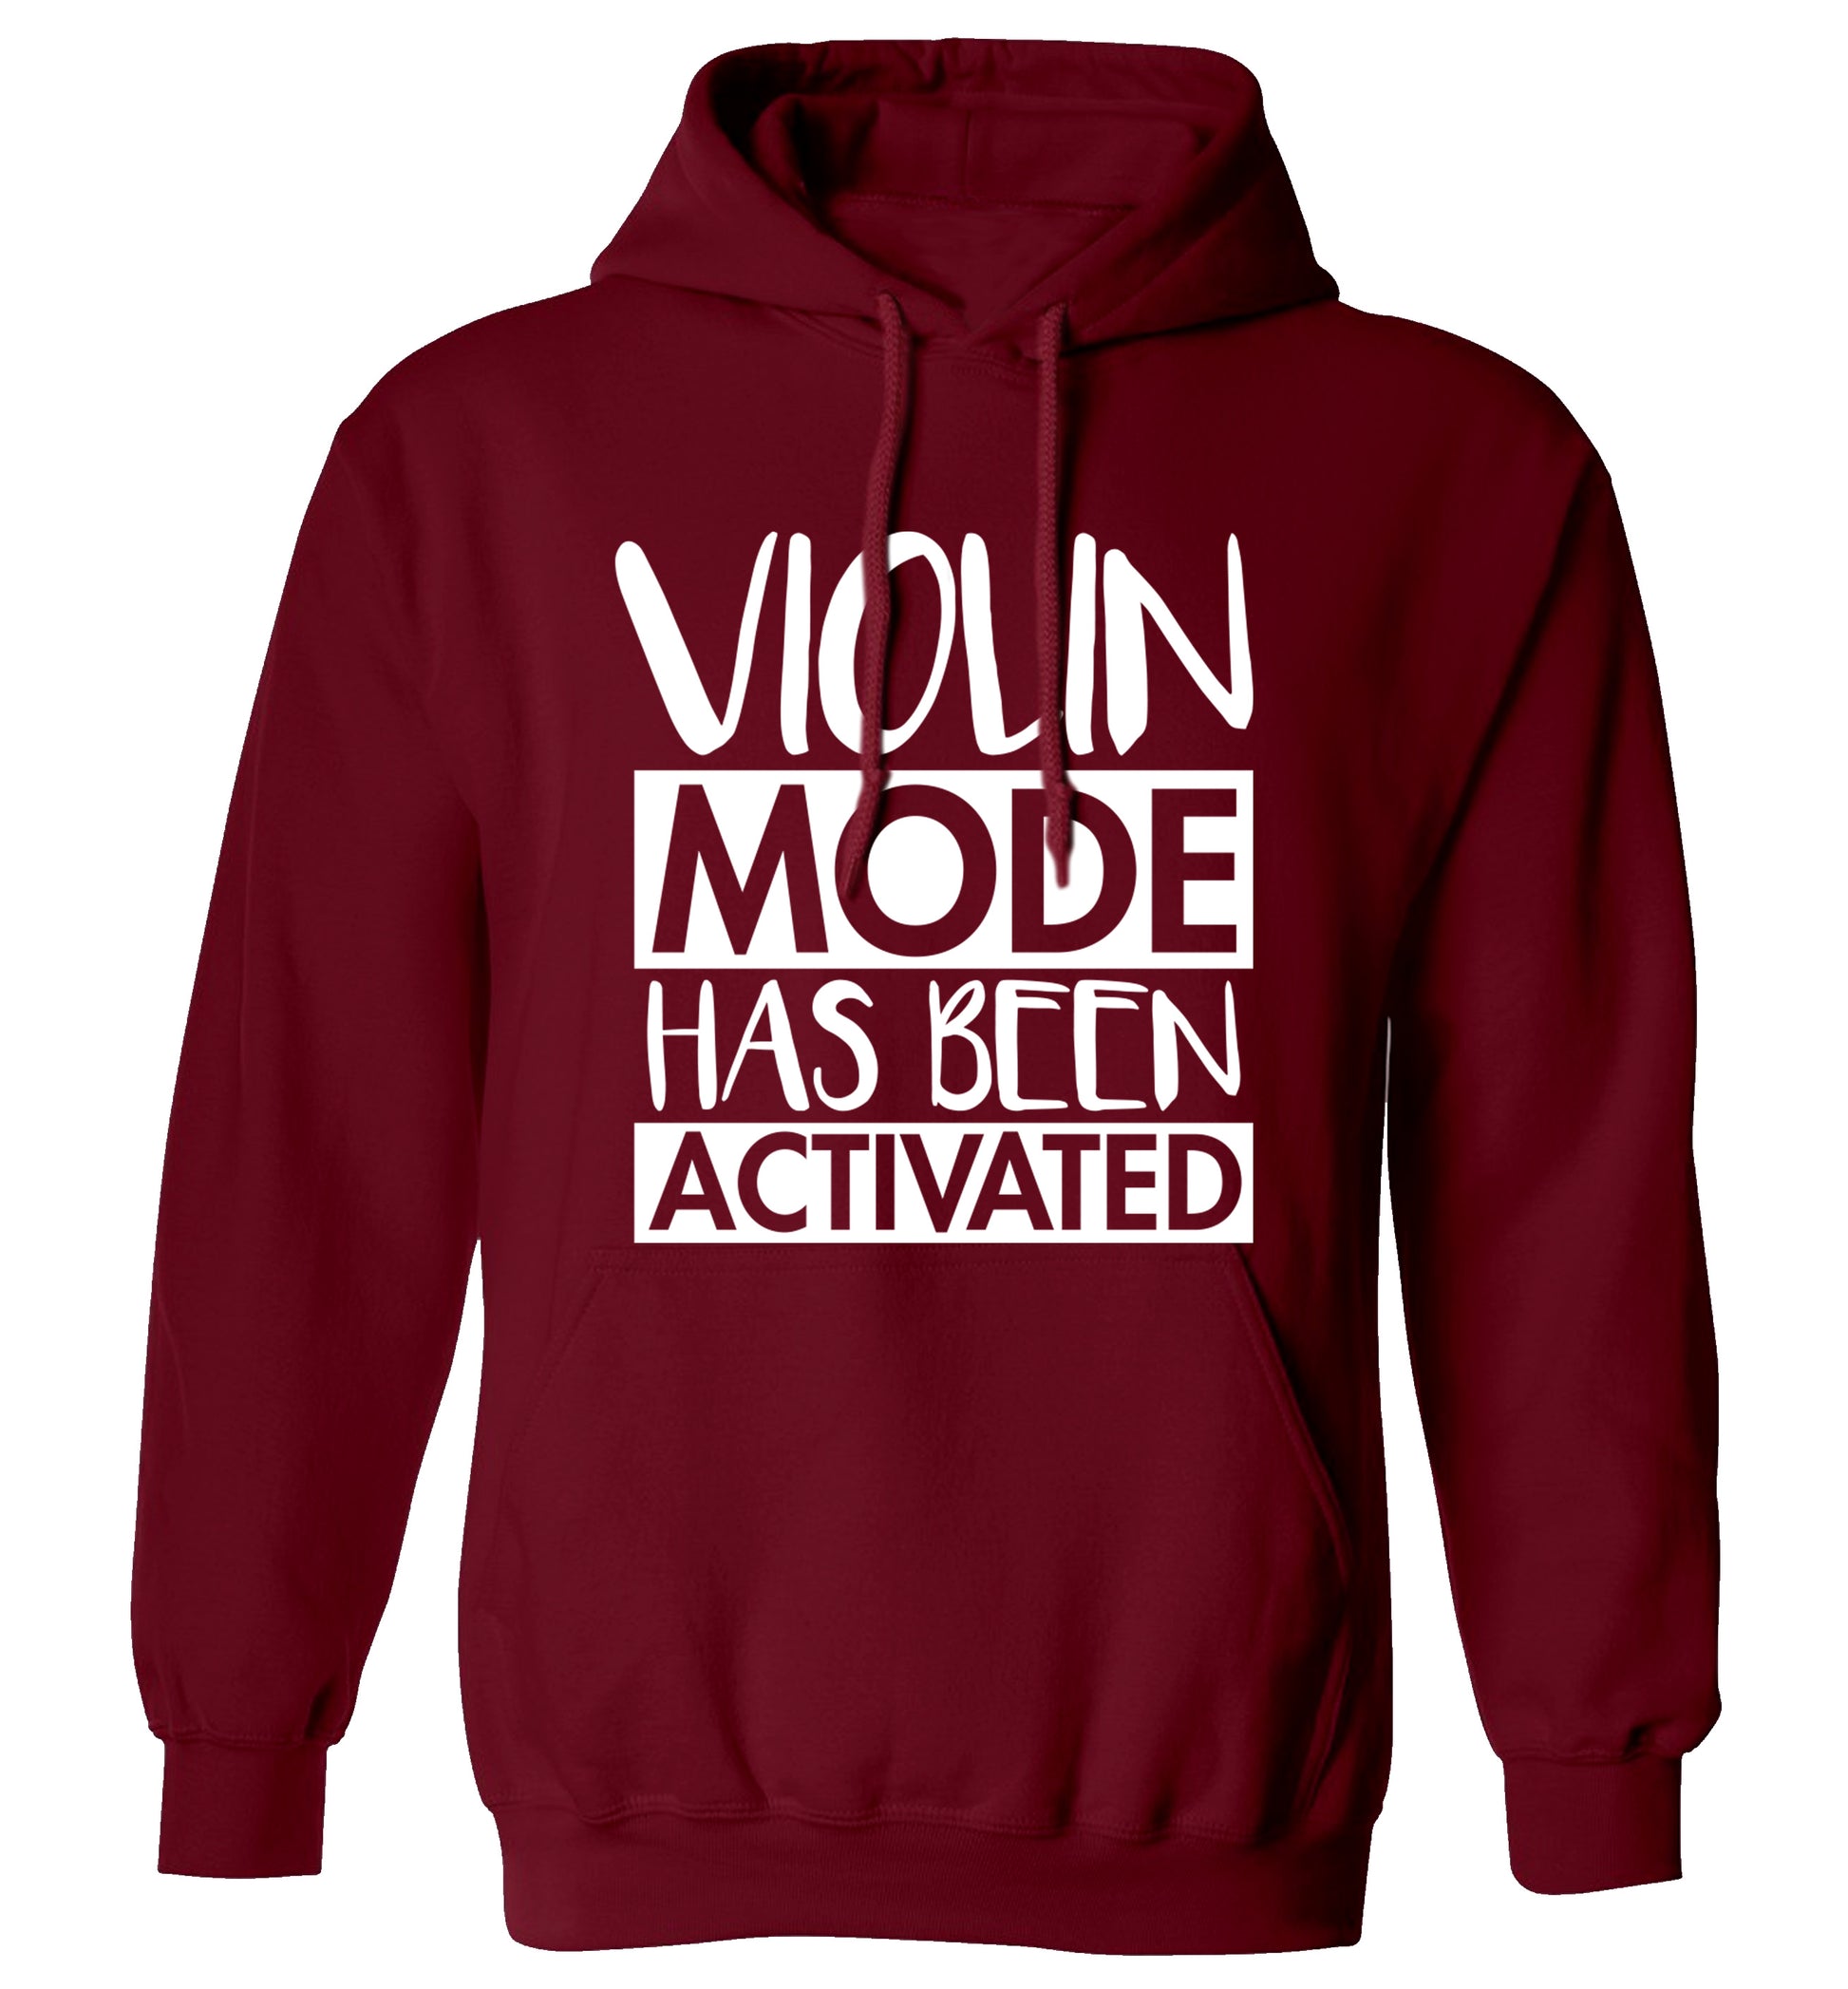 Violin Mode Activated adults unisex maroon hoodie 2XL